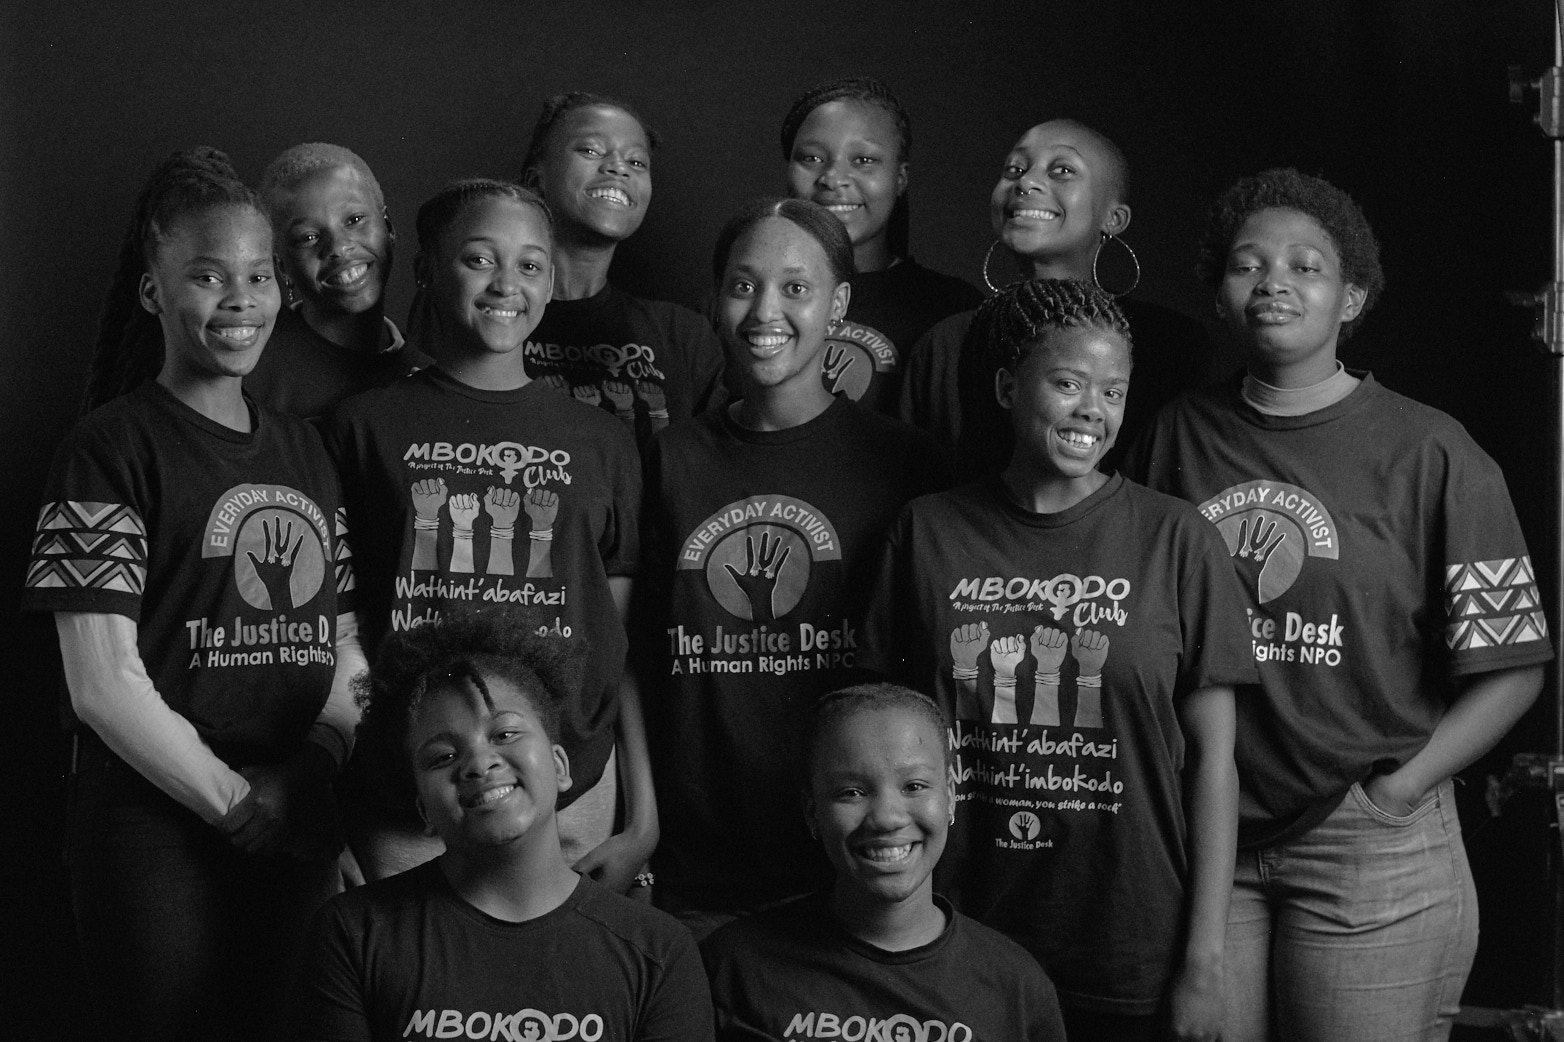 Ending GBV- The Mbokodo & iNtsika yeThemba Project